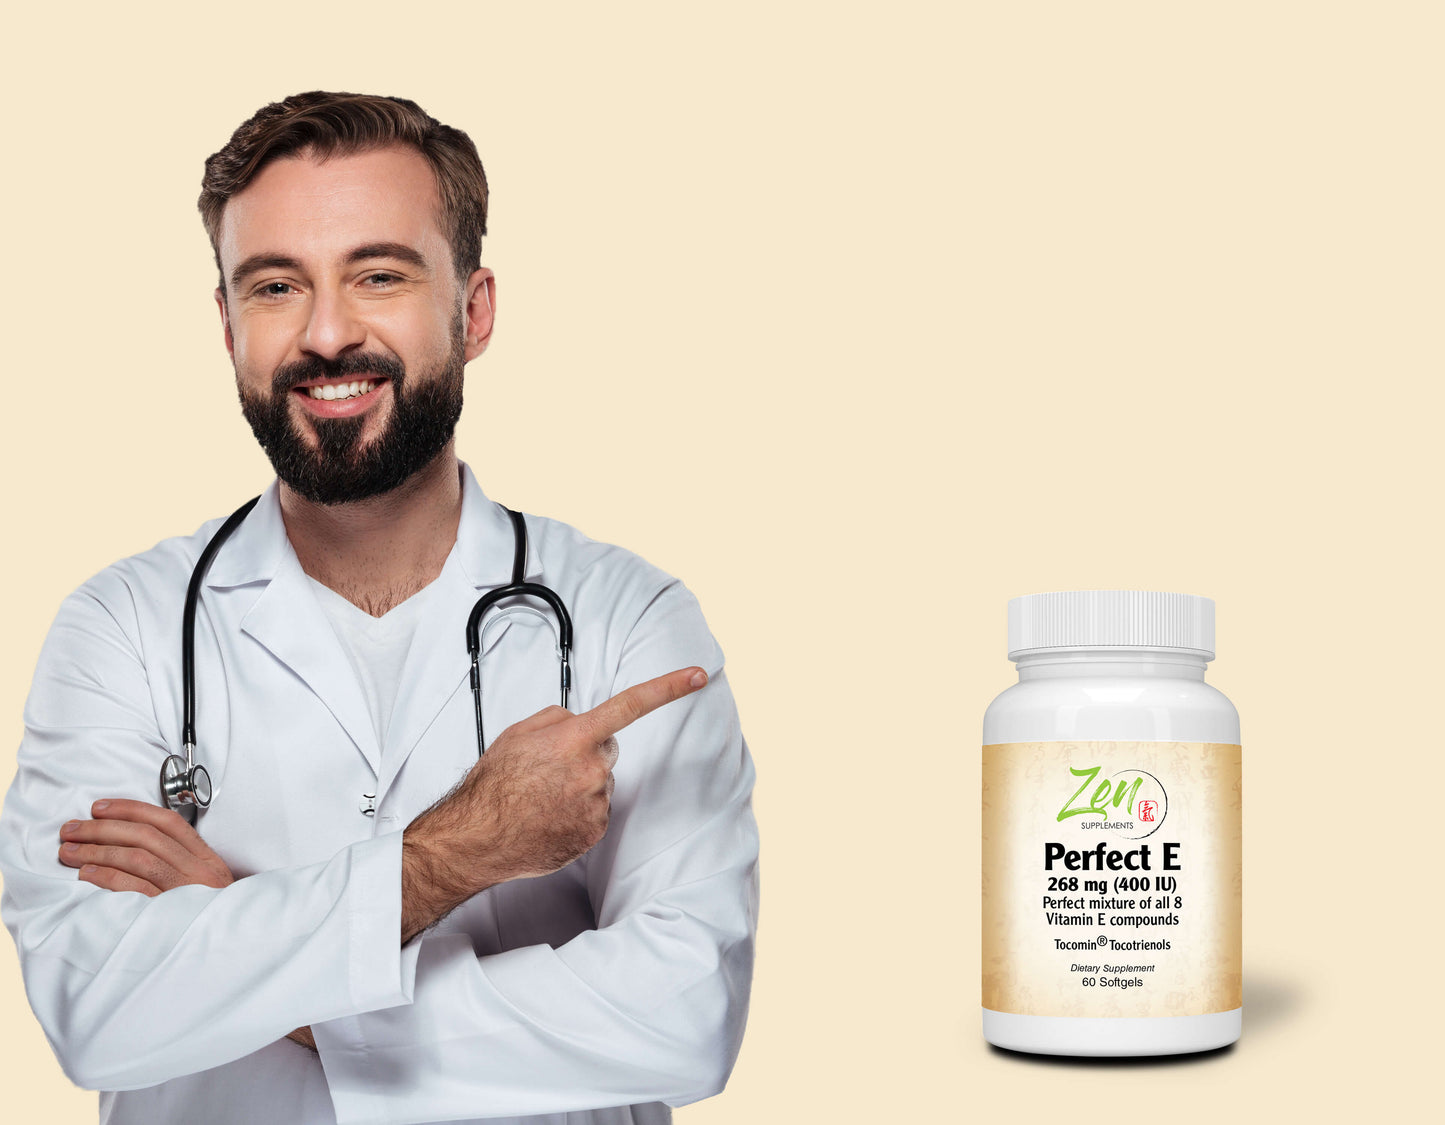 Perfect E - With Tocotrienols - 60 Softgel